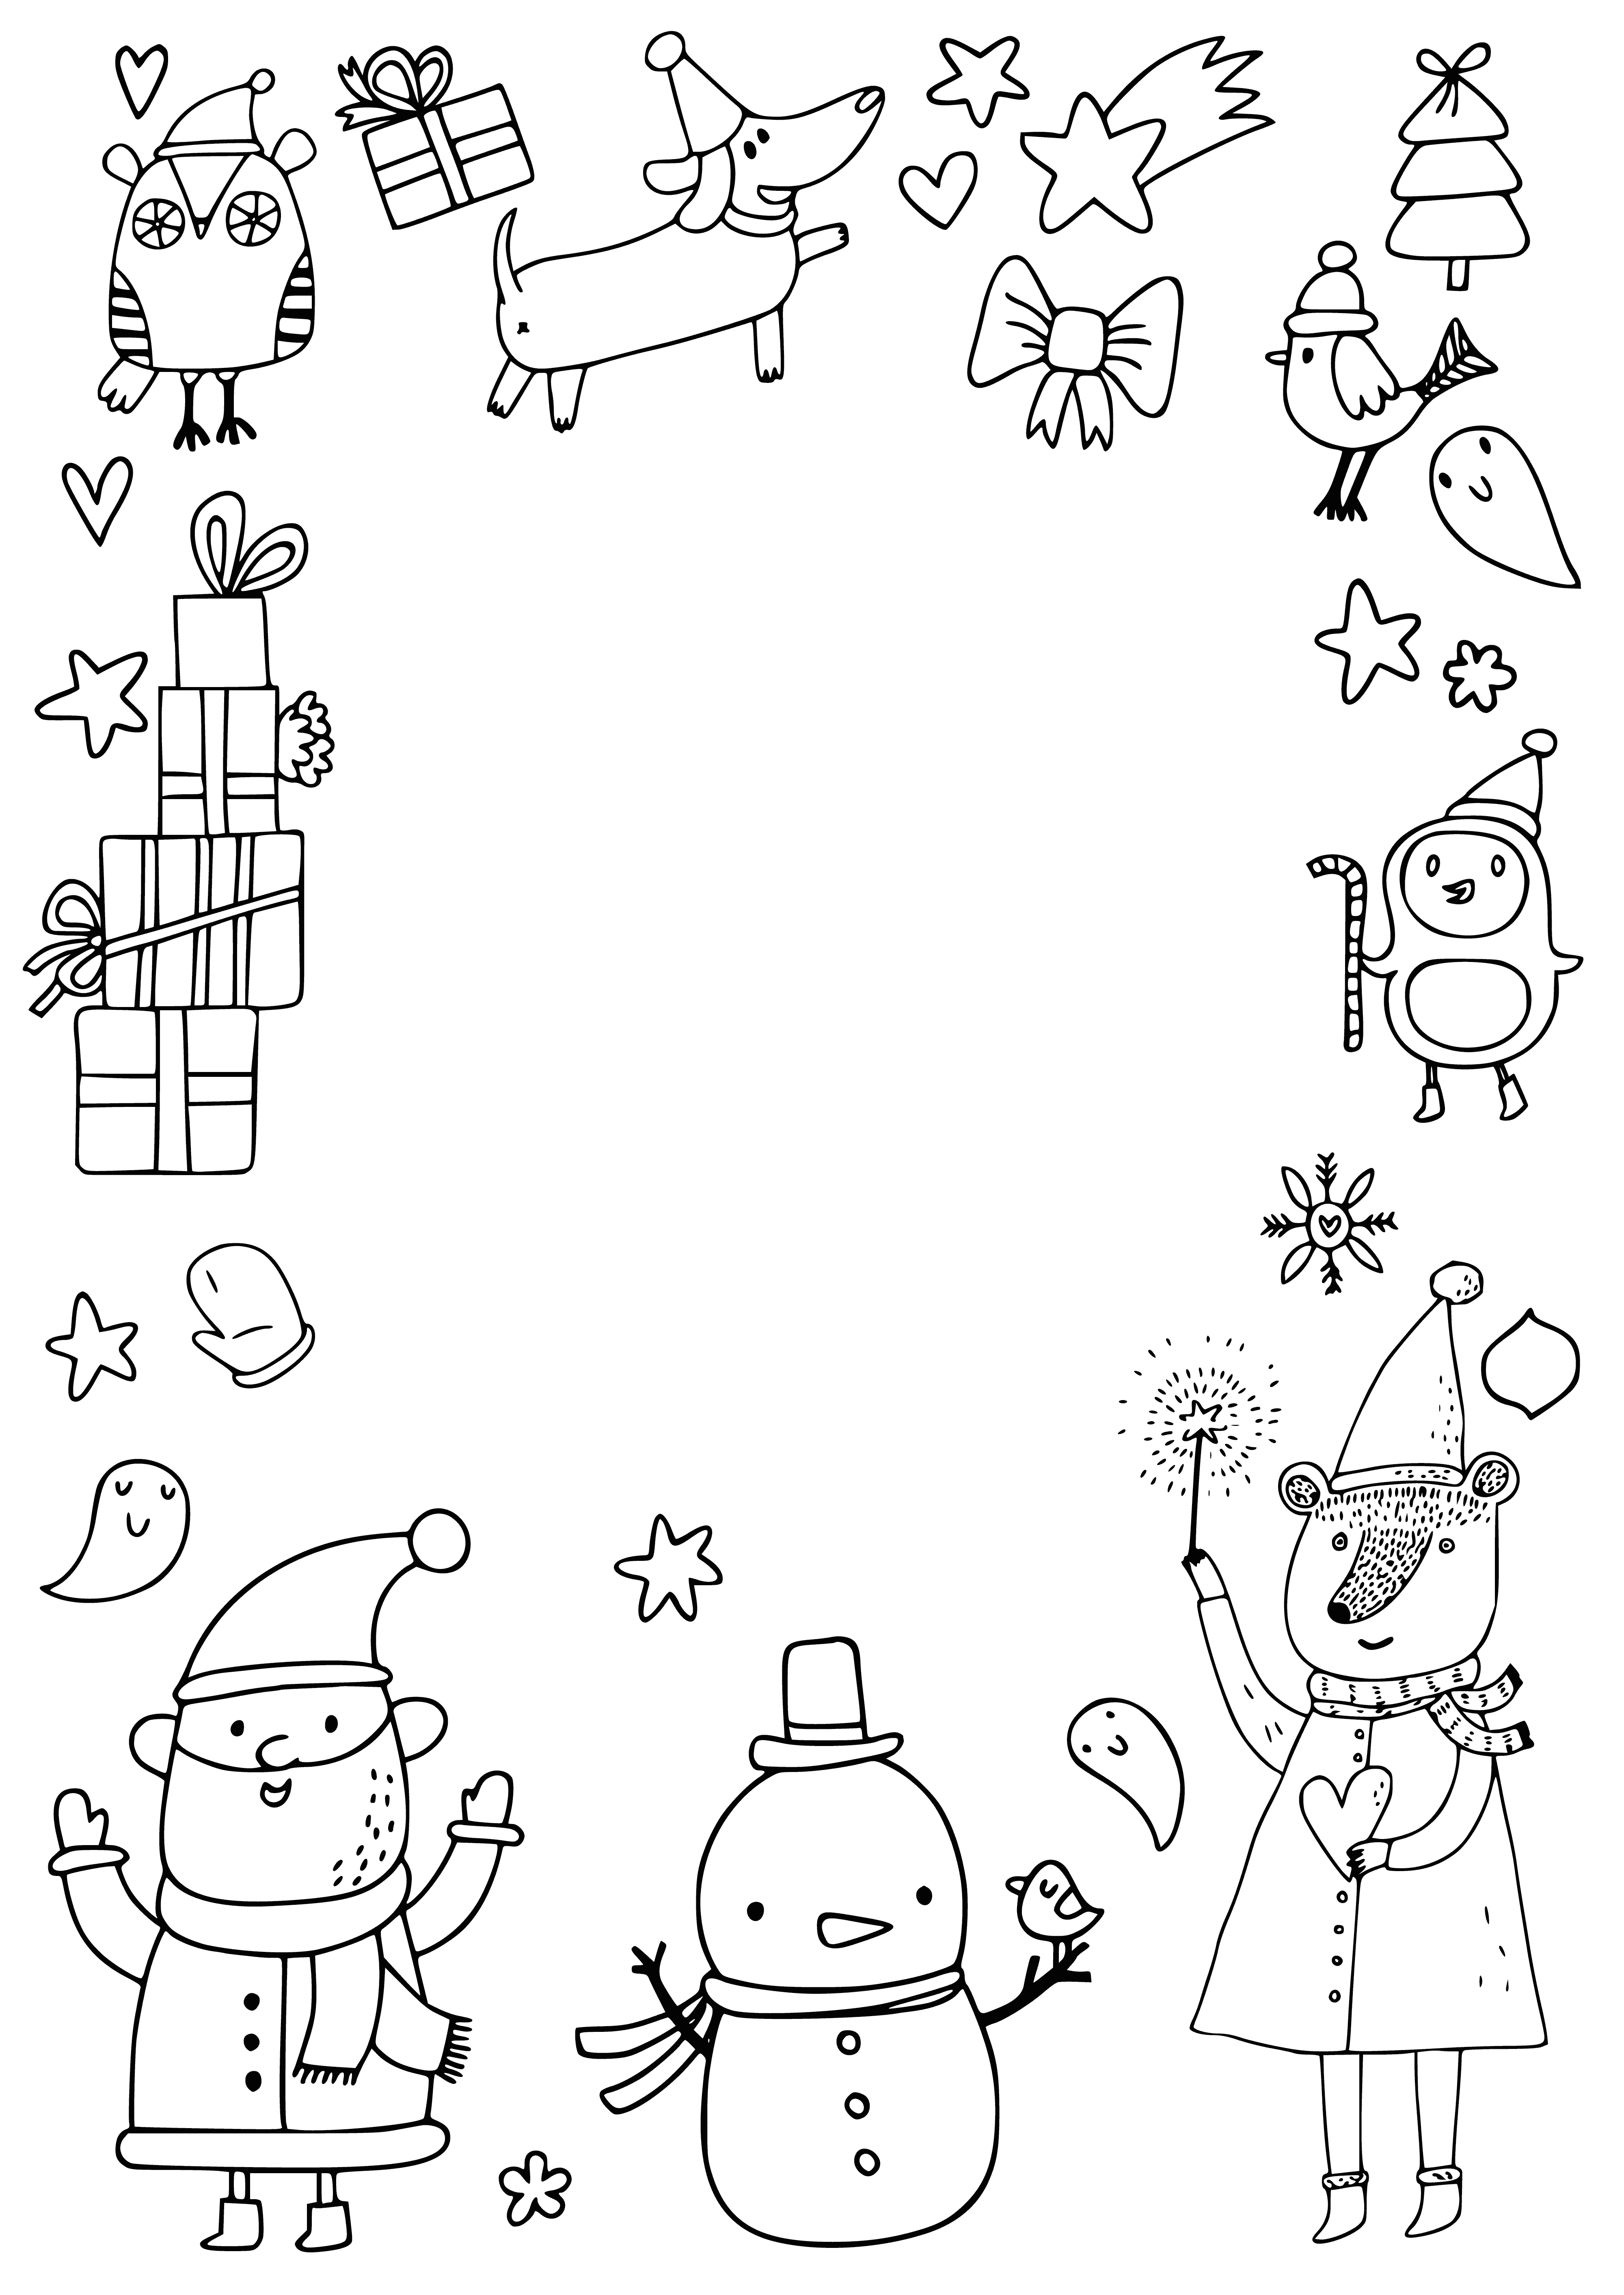 coloring page: "December": written in blue ink at the top left corner. Draw a Christmas tree w/ yellow star, presents & cat, a red & white candy cane. Signature reads "Love, Sarah" at bottom.